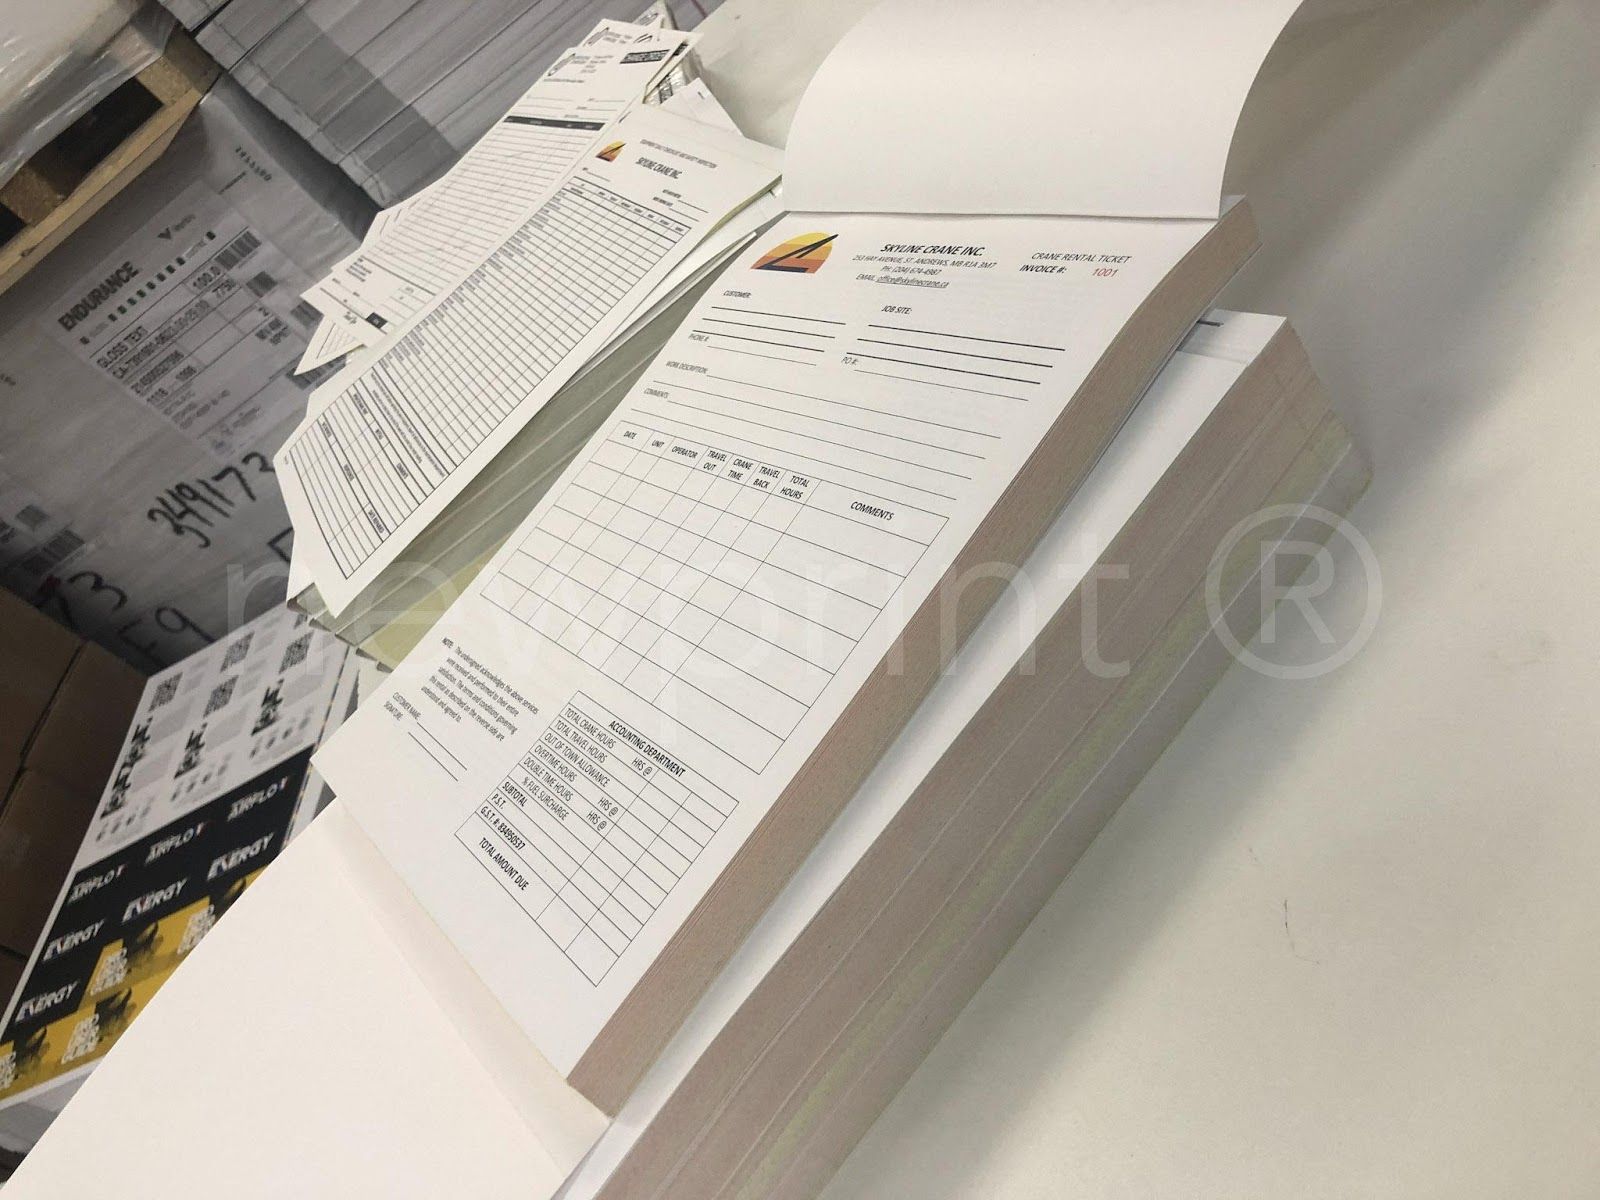 Stack of NCR forms, top one is open.